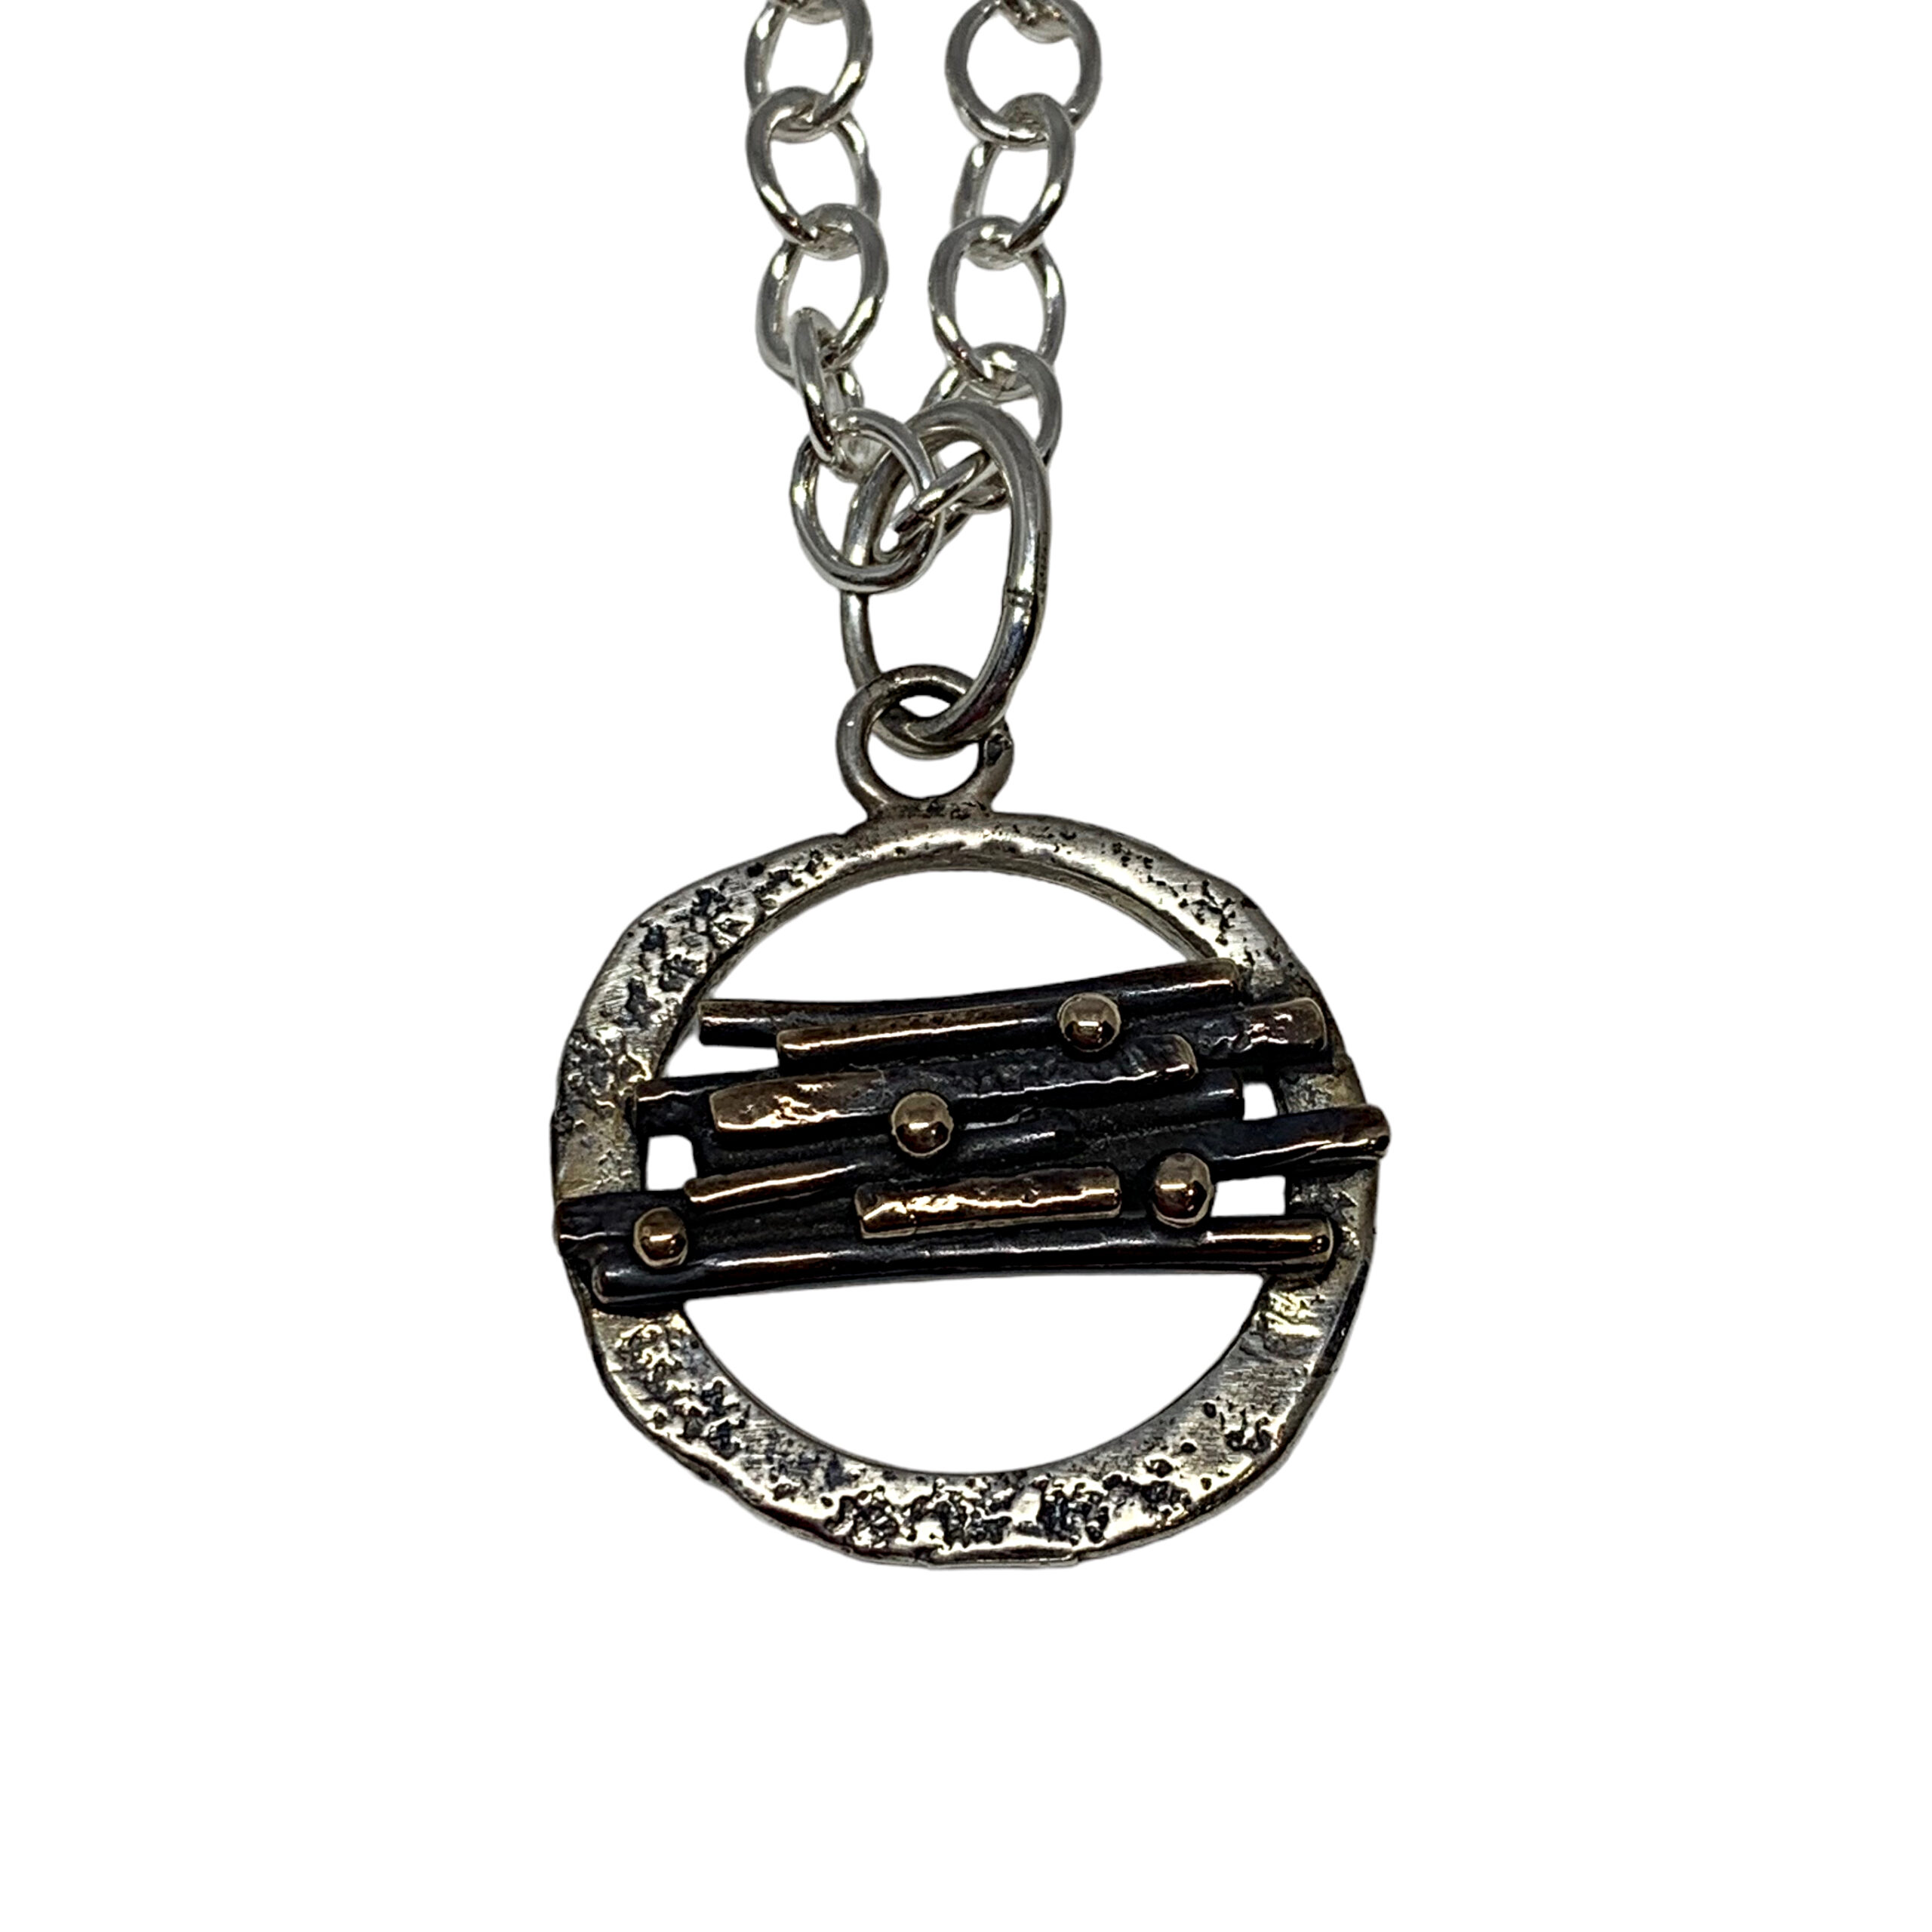 Handmade sterling silver and bronze pendant by Karyn Chopik | Effusion Art Gallery, Invermere, BC